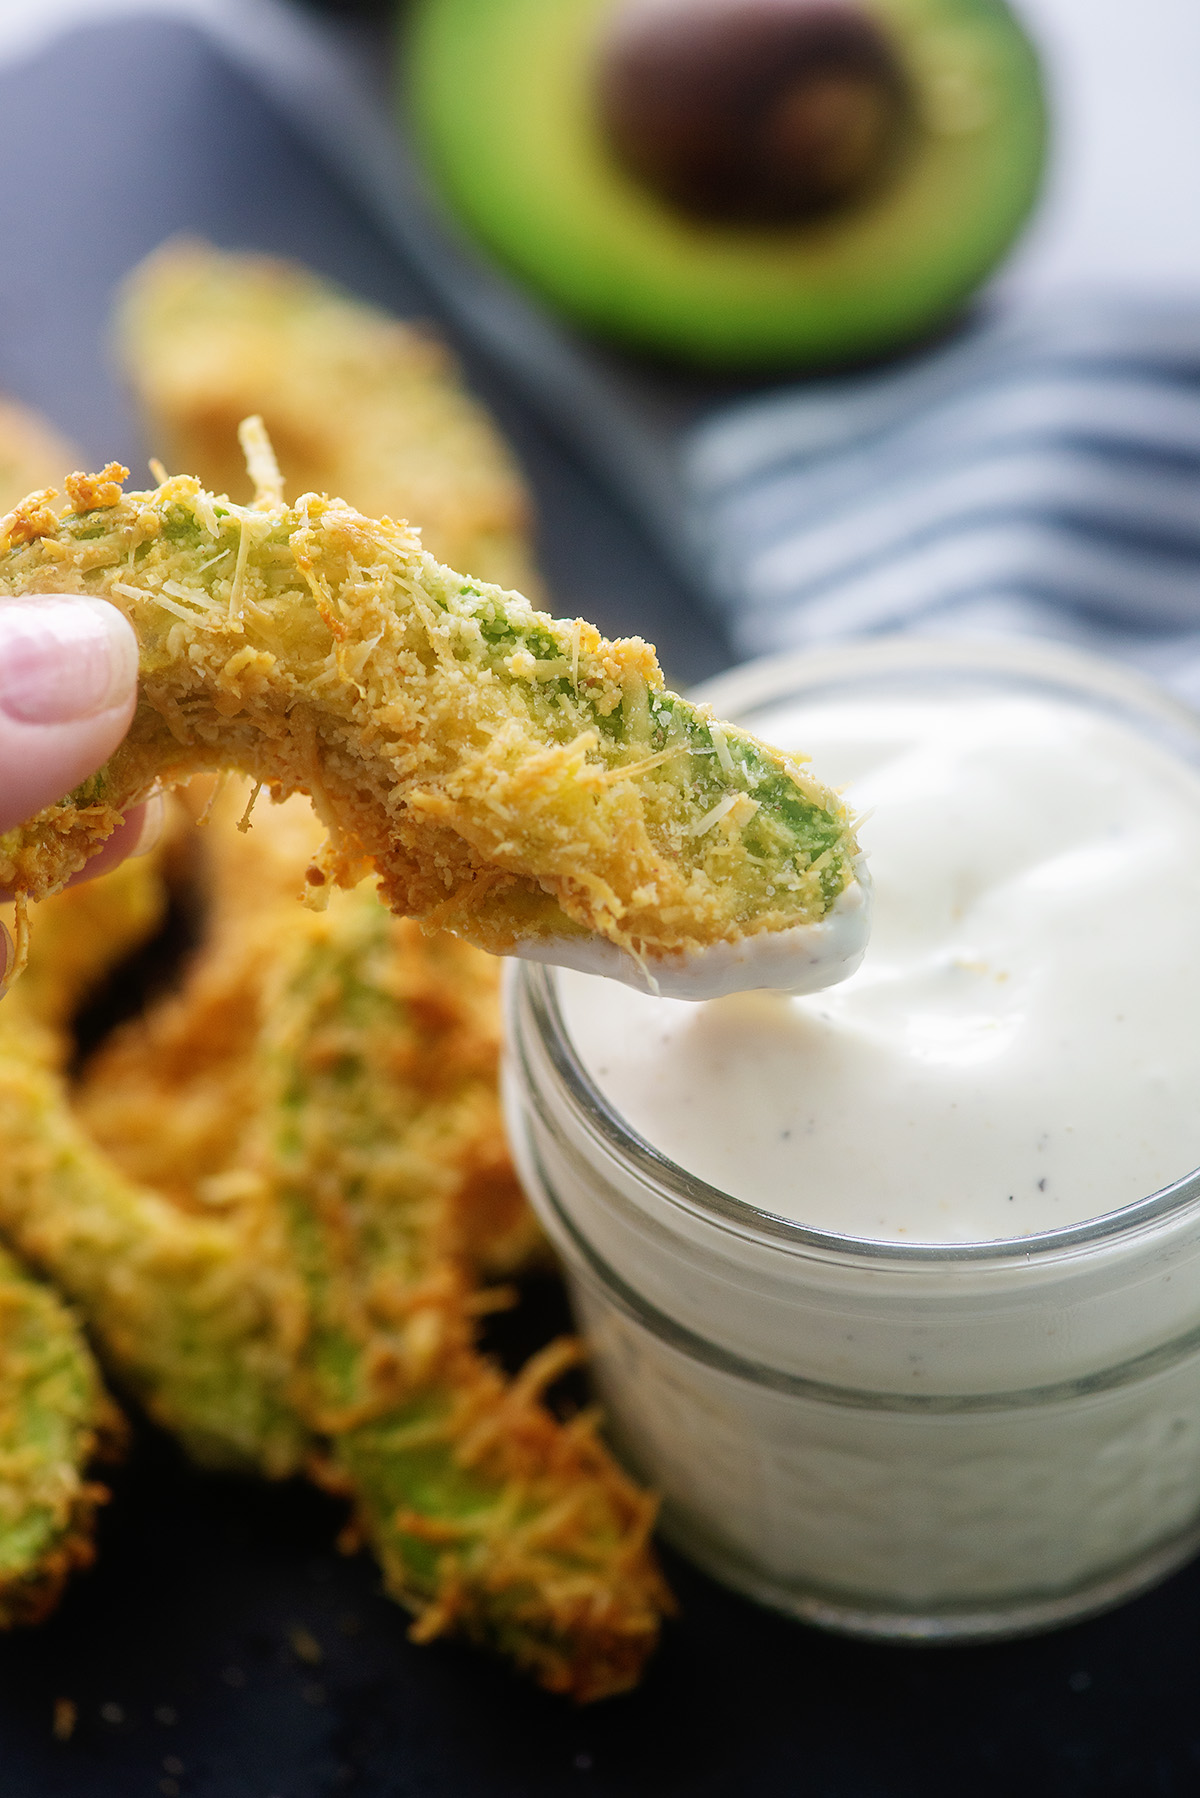 An avocado fry being dipped into ranch dressing